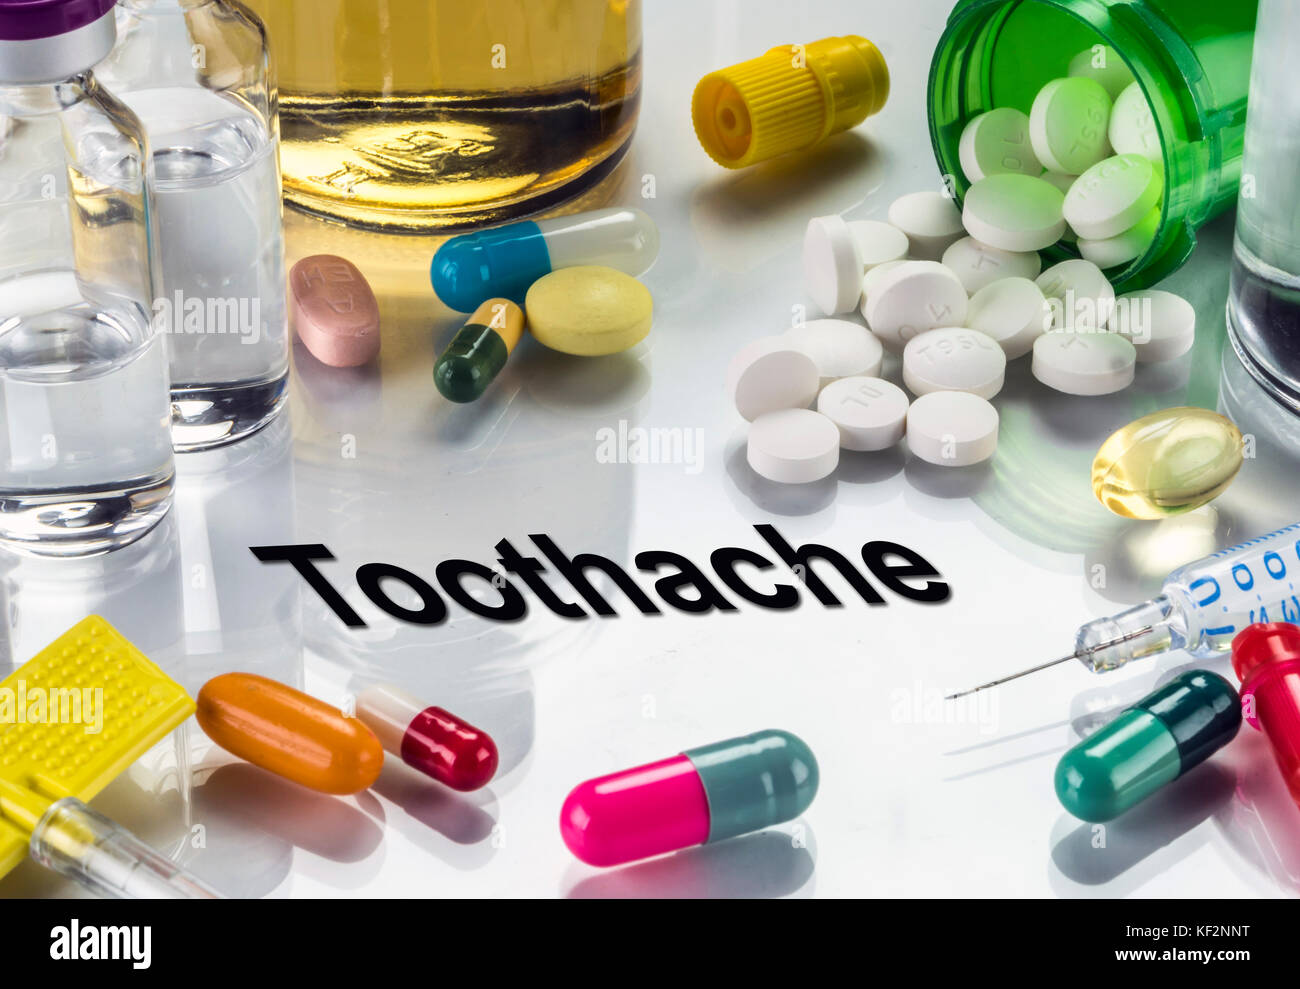 Toothache, medicines as concept of ordinary treatment, conceptual image Stock Photo